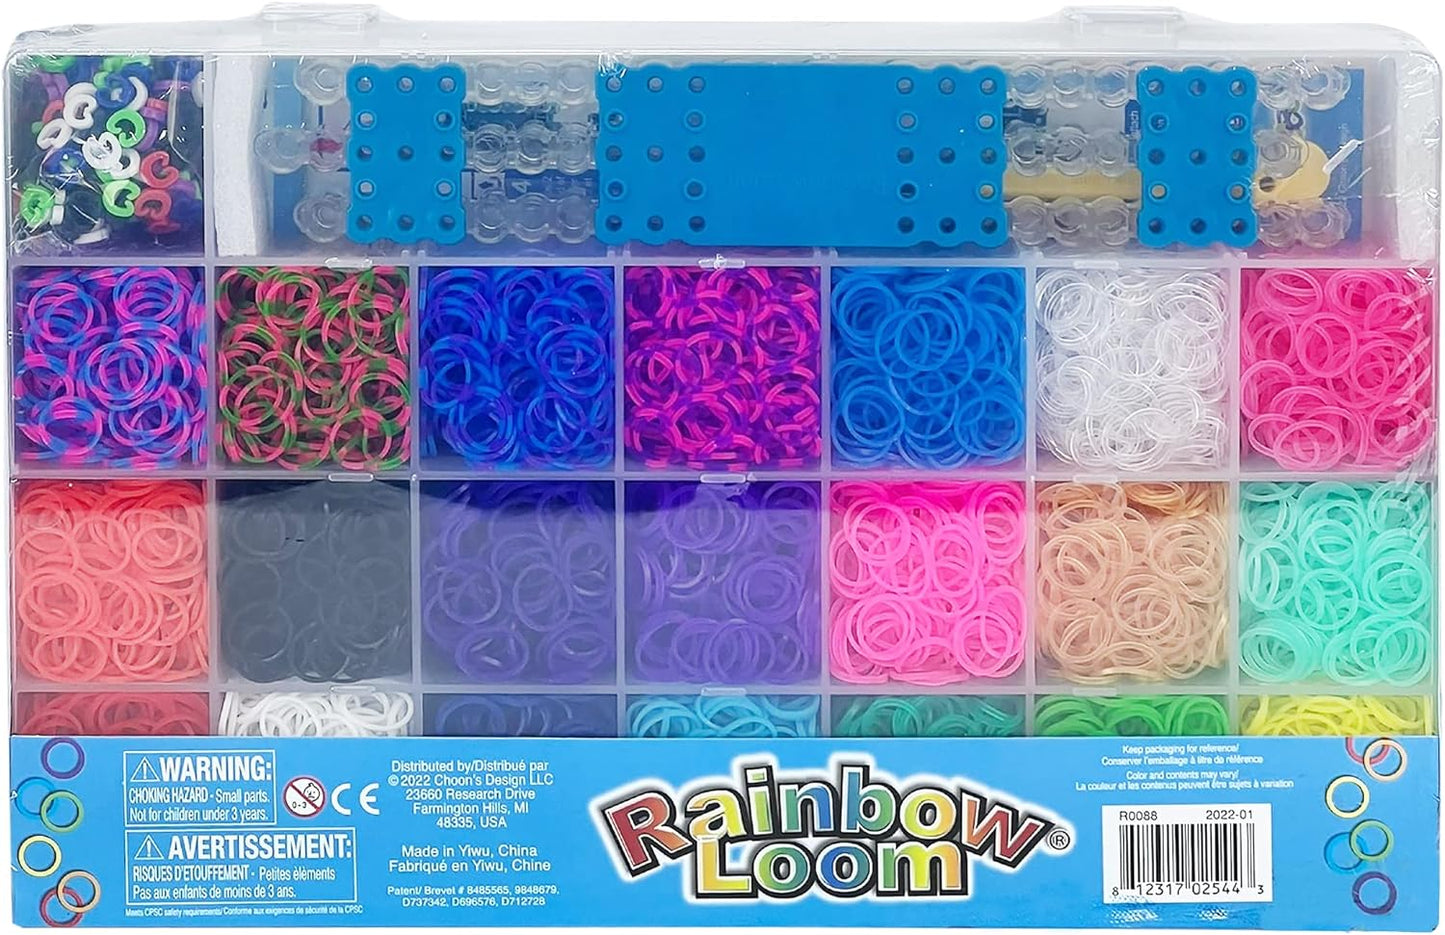 ® MEGA Combo Set, Features 7000+ Colorful Rubber Bands, 2 Step-By-Step Bracelet Instructions, Organizer Case, Great Gift for Kids 7+ to Promote Fine Motor Skills (Packaging May Vary)